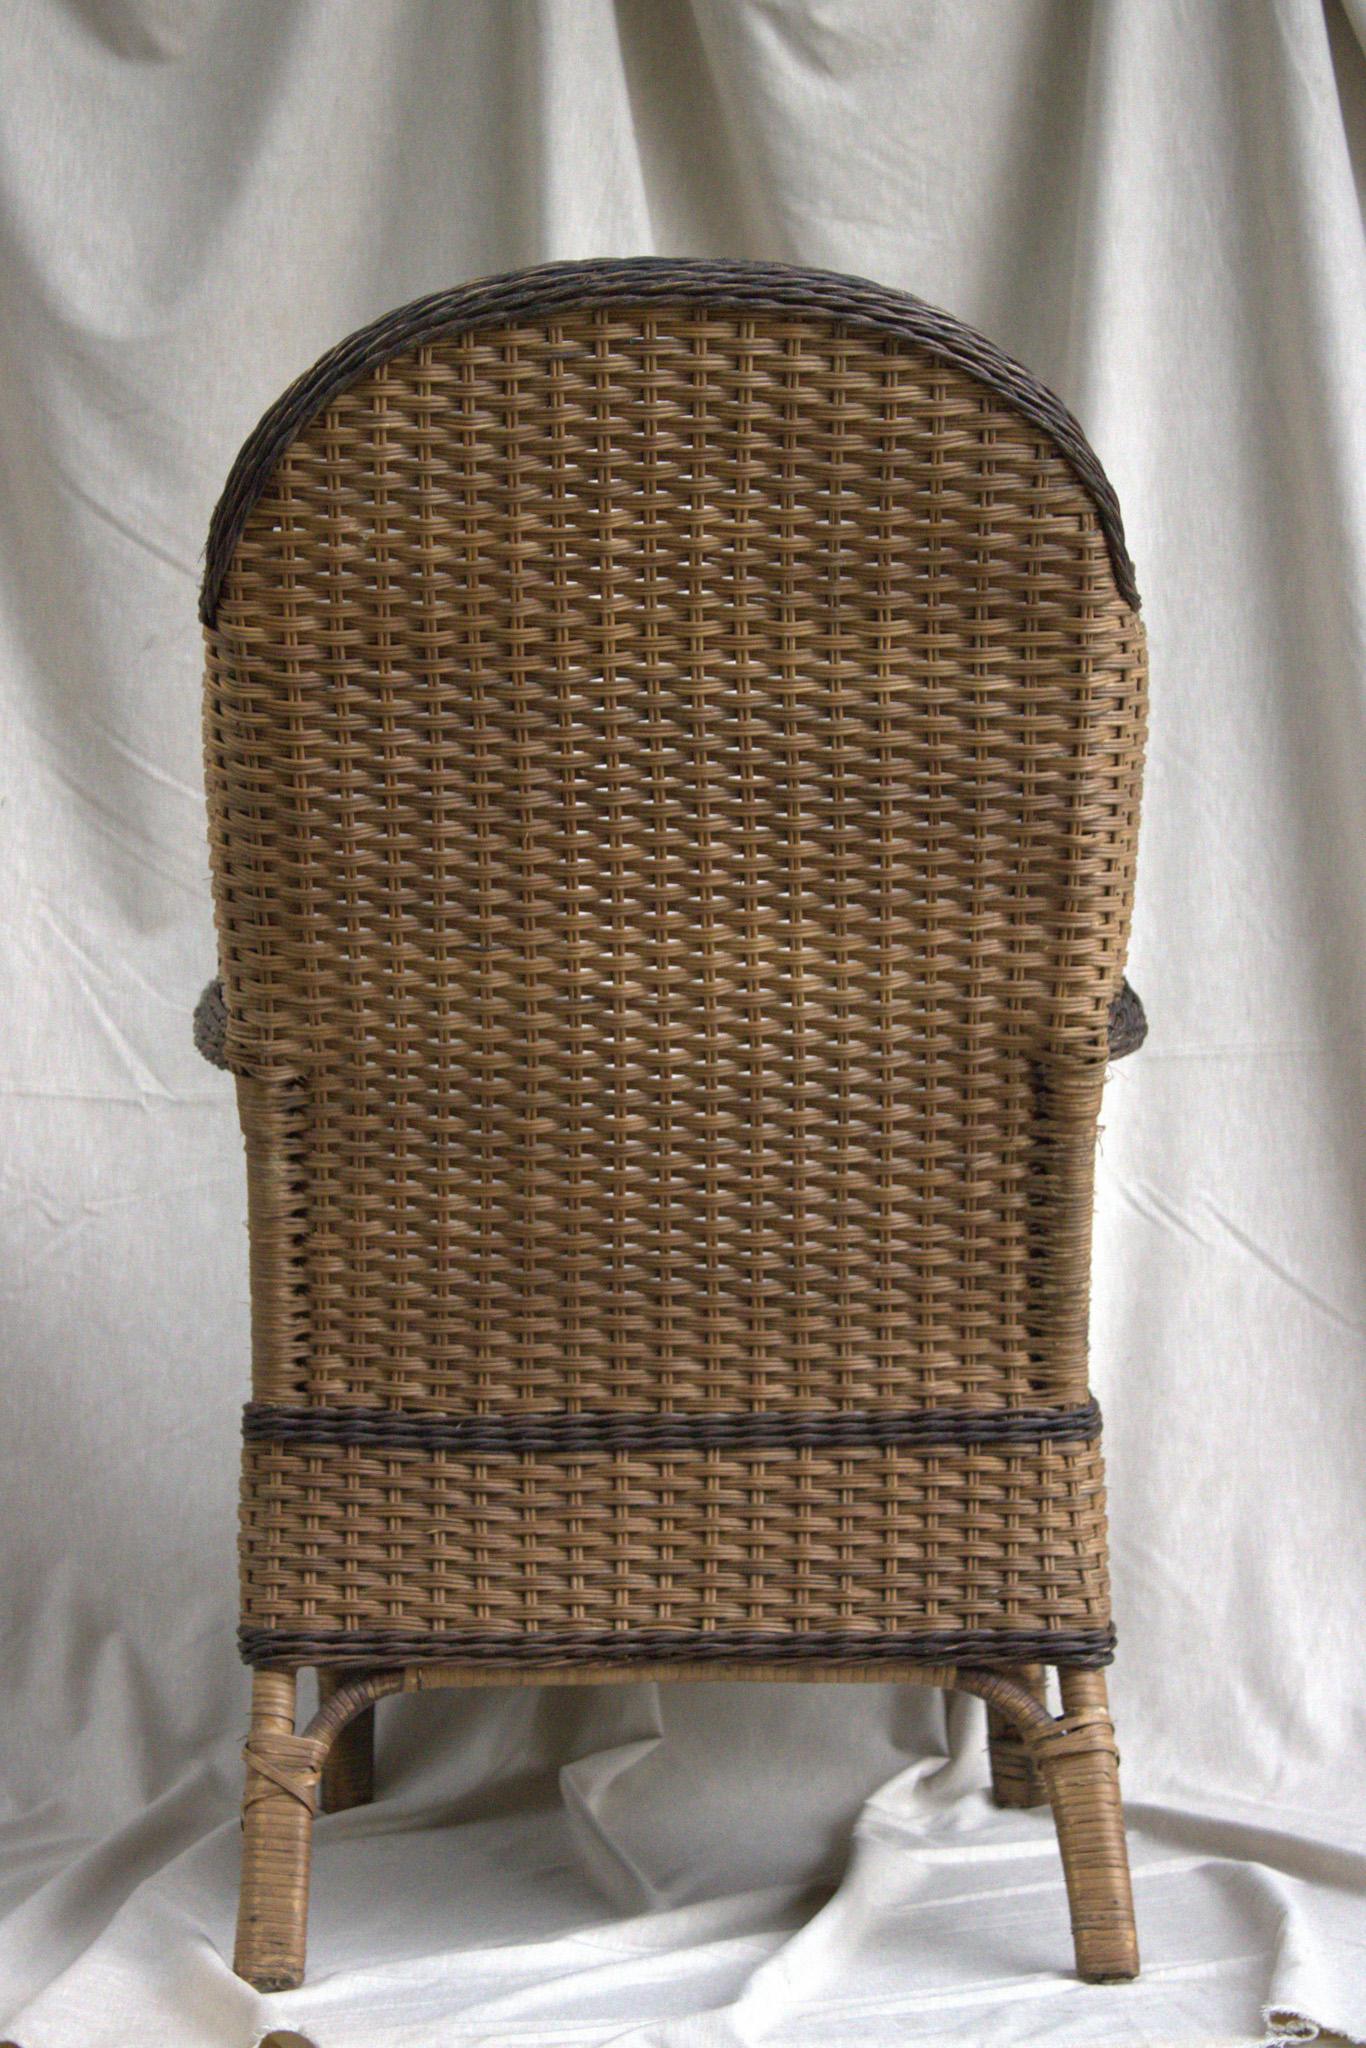 Woven Arm Chair in Wickered Artistry Rattan - Possible Italian Originated - XX Century For Sale